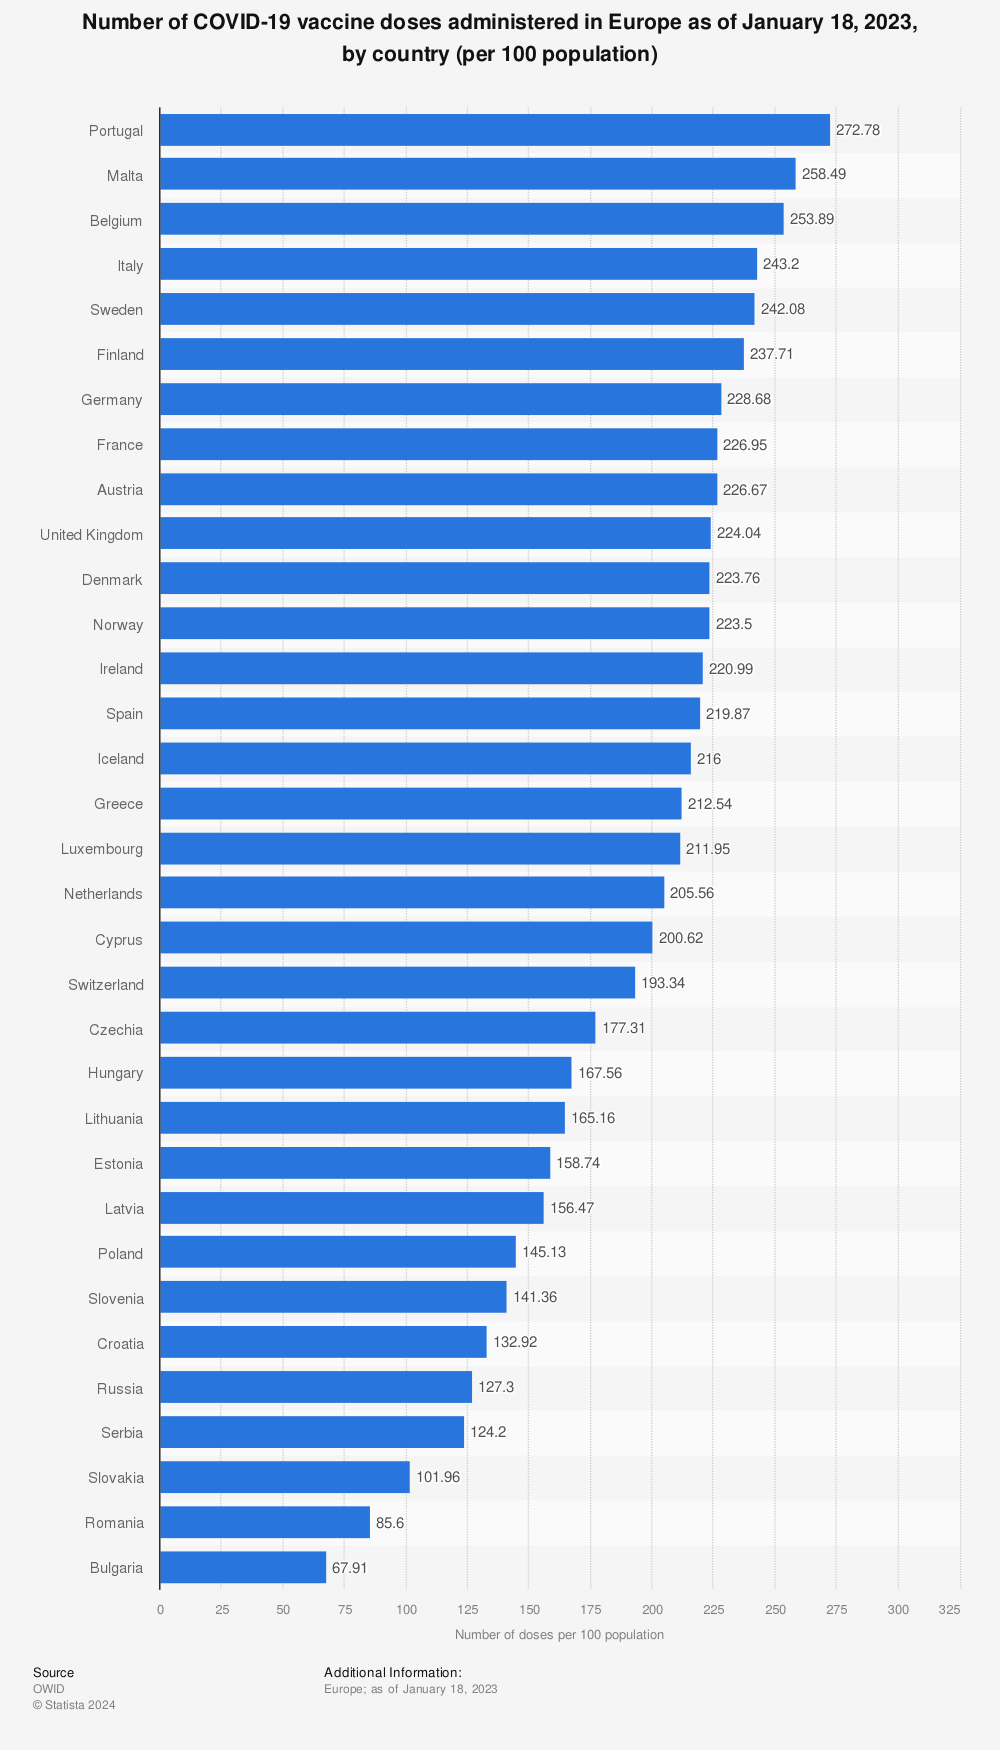 Statistic: Number of COVID-19 vaccine doses administered in Europe as of February 10, 2022, by country (per 100 population) | Statista